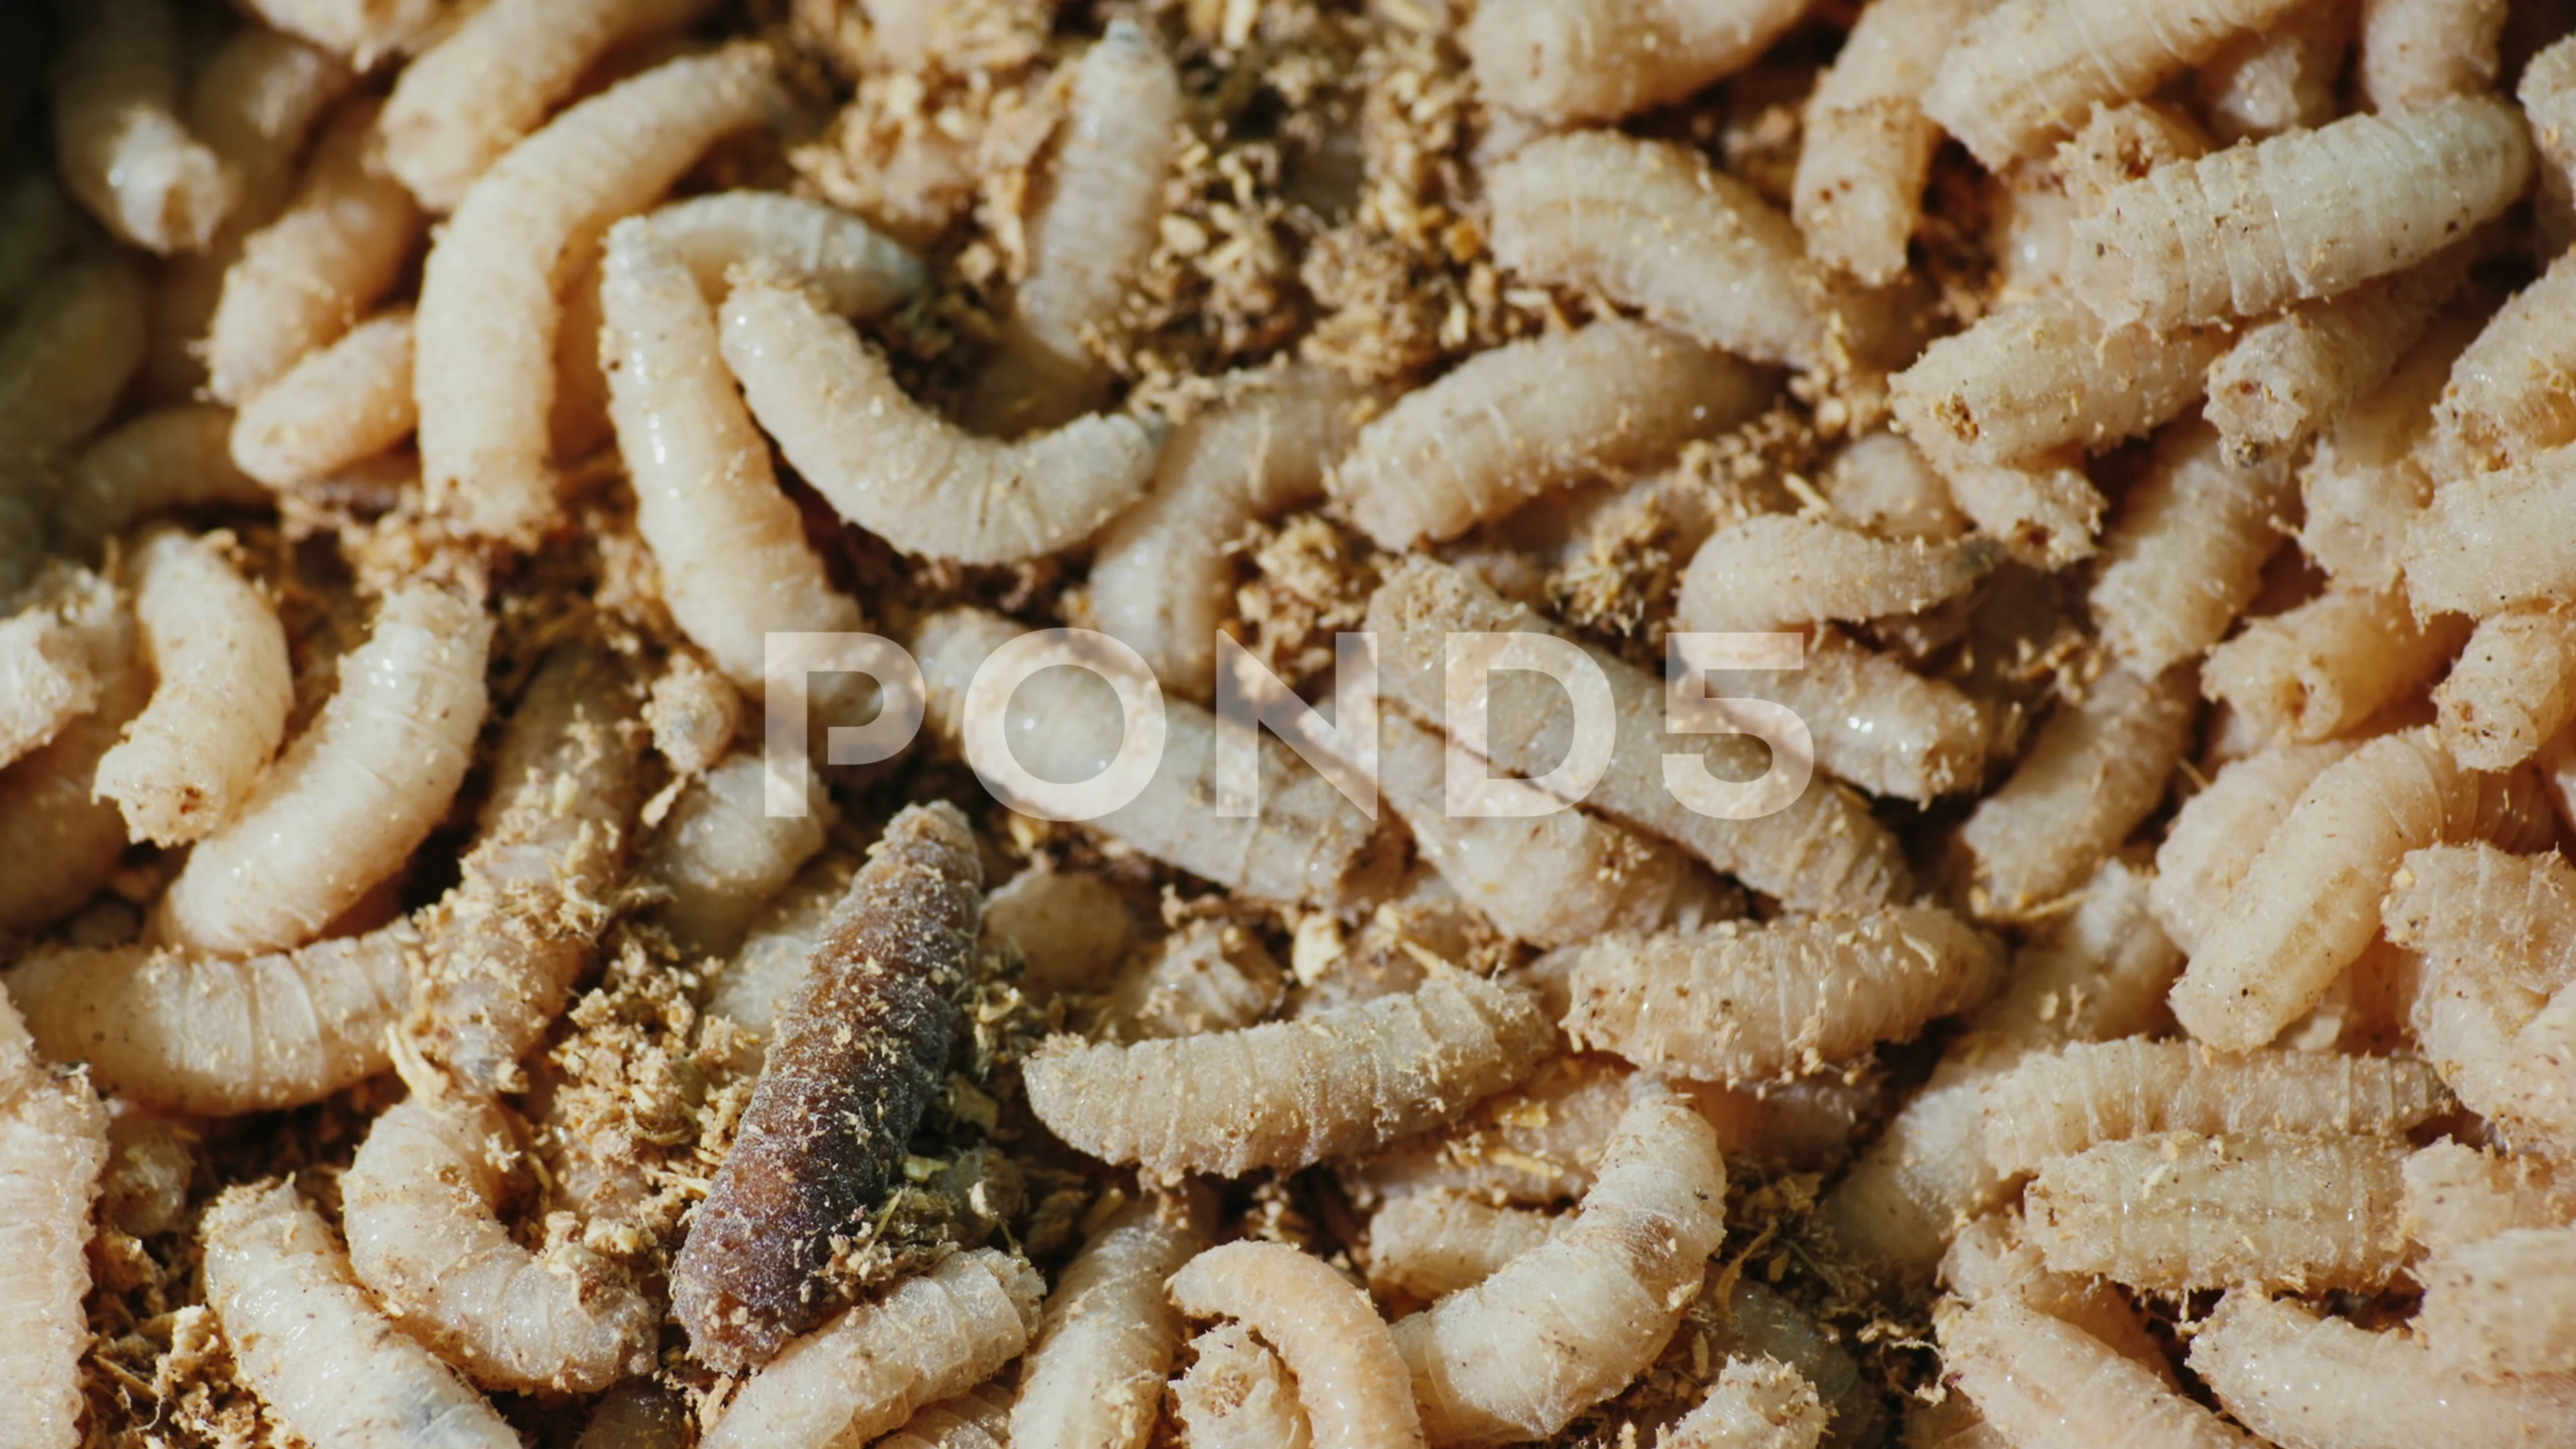 Buy 500 Maggots Spikes Live Bait Ice Fishing Grub Worms Reptile